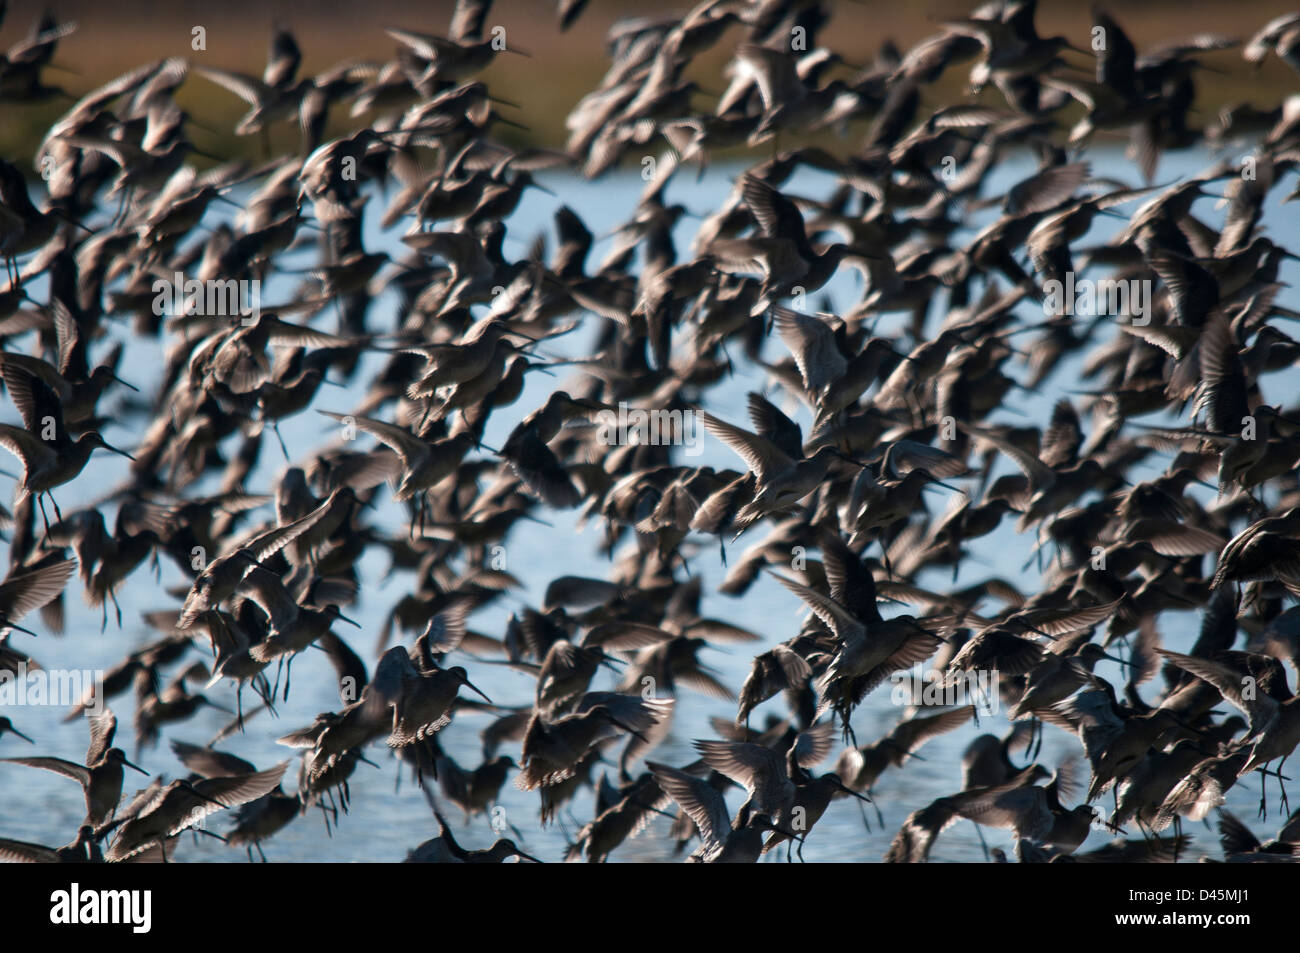 Long-Billed Dowitchers (Limnodromus scolopaceus) Take off in a Flock Stock Photo